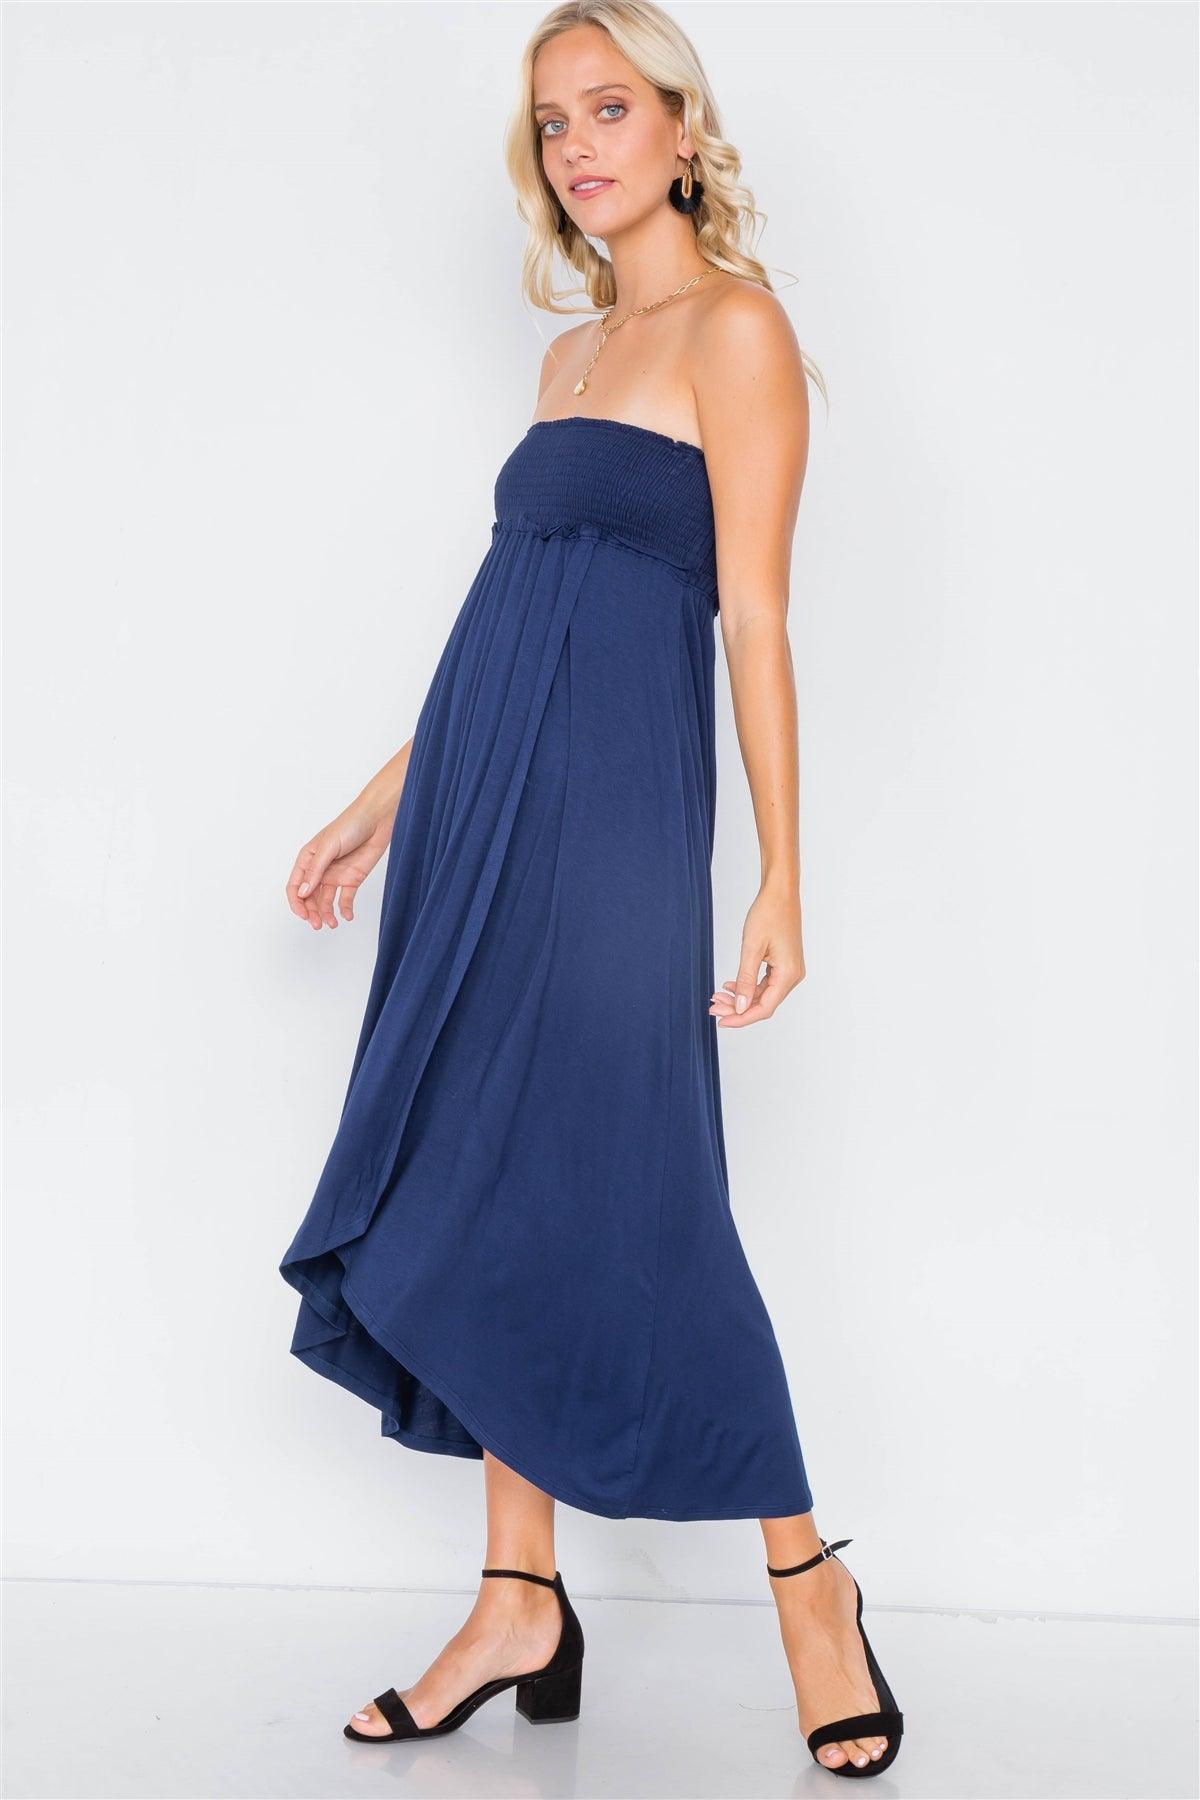 Navy Off-The-Shoulder Ruched Tube Top Midi Dress  /2-2-3